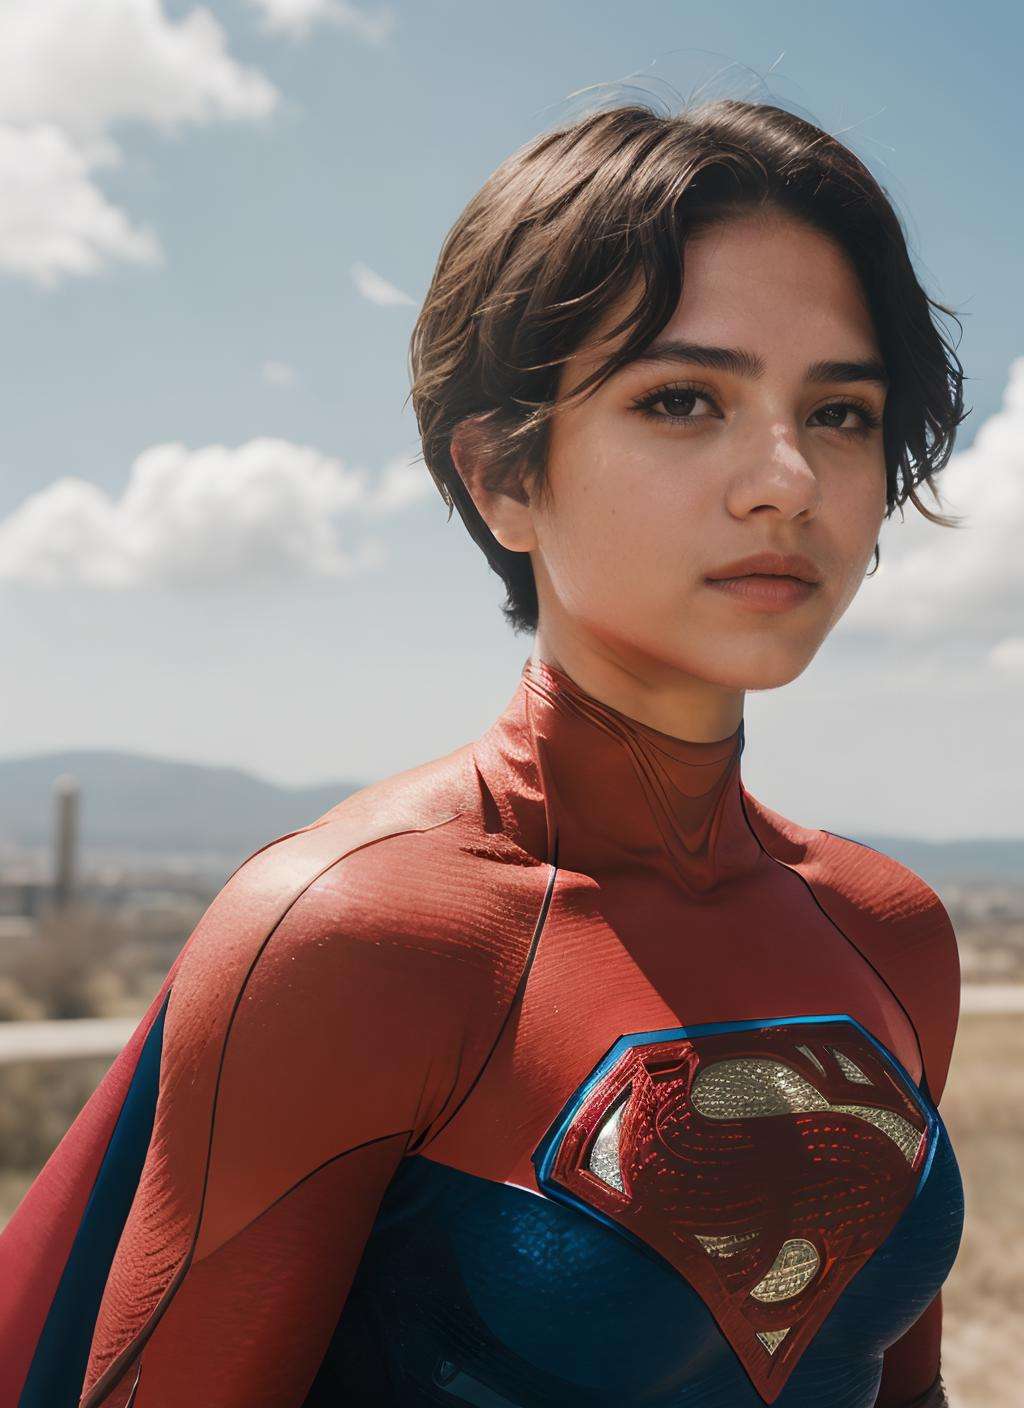 photo of supergirl, short hair, bodysuit, cape, outdoors sunny day, background sky, analog style (look at viewer:1.2) (skin texture), Fujifilm XT3, DSLR, 50mm  <lora:Sasha Calle Supergirl:0.85>